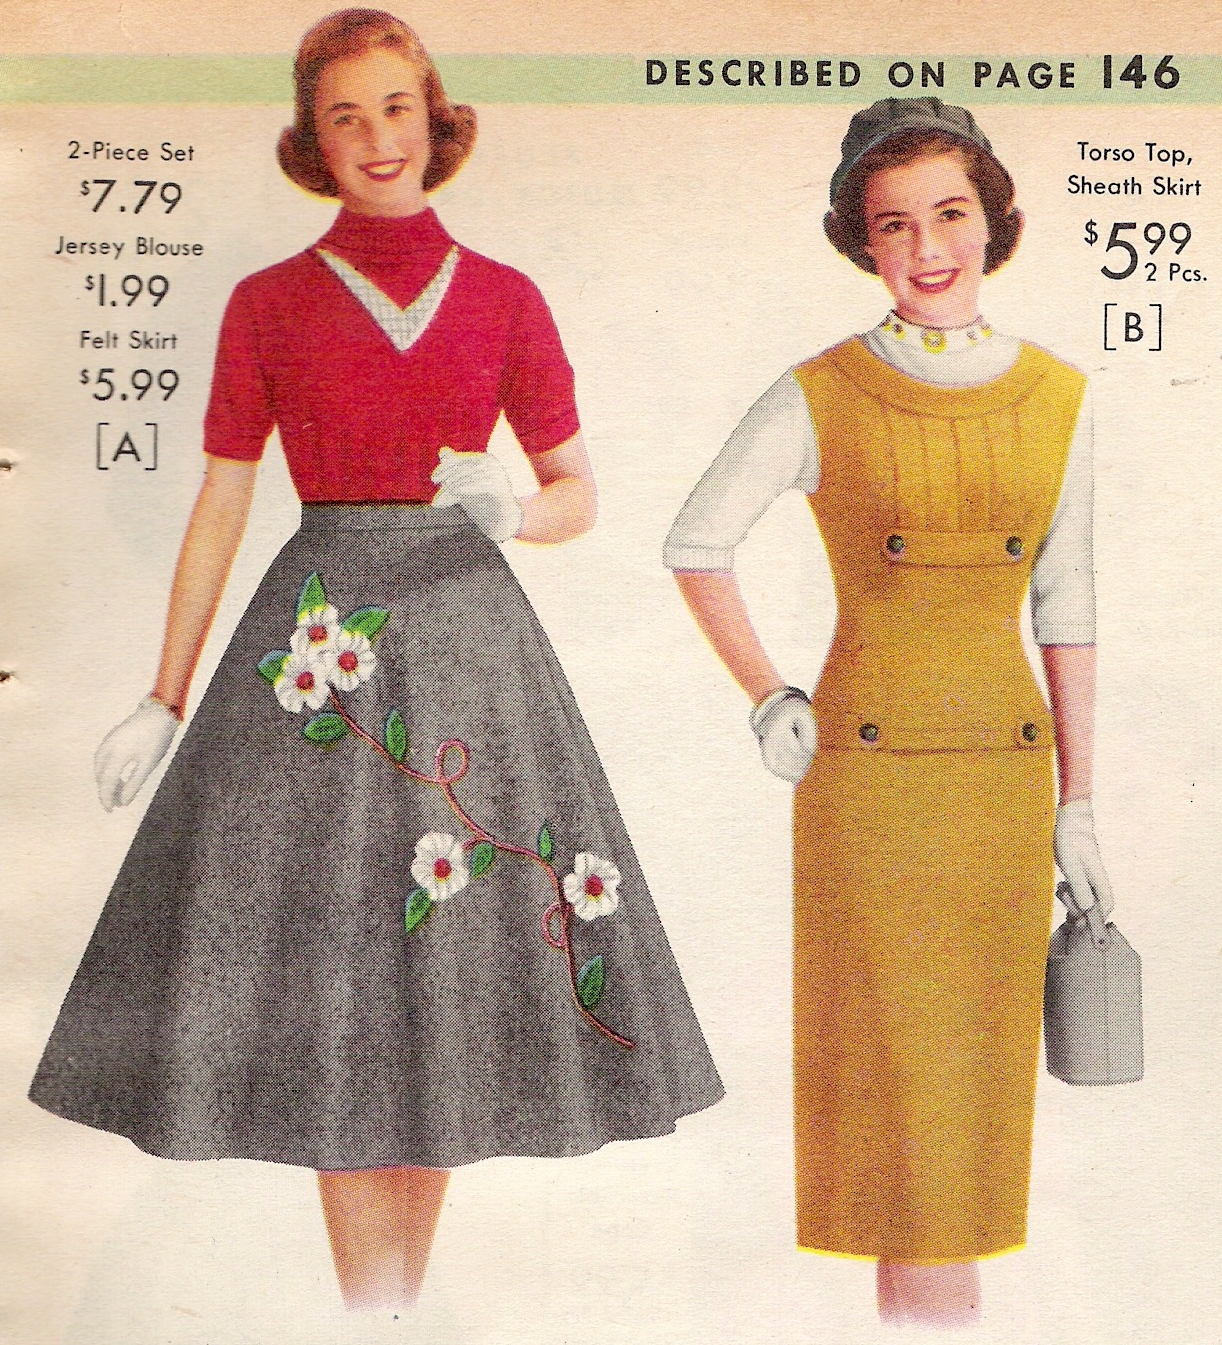 1940s Inventions We Still Love- Food, Games, Fashion